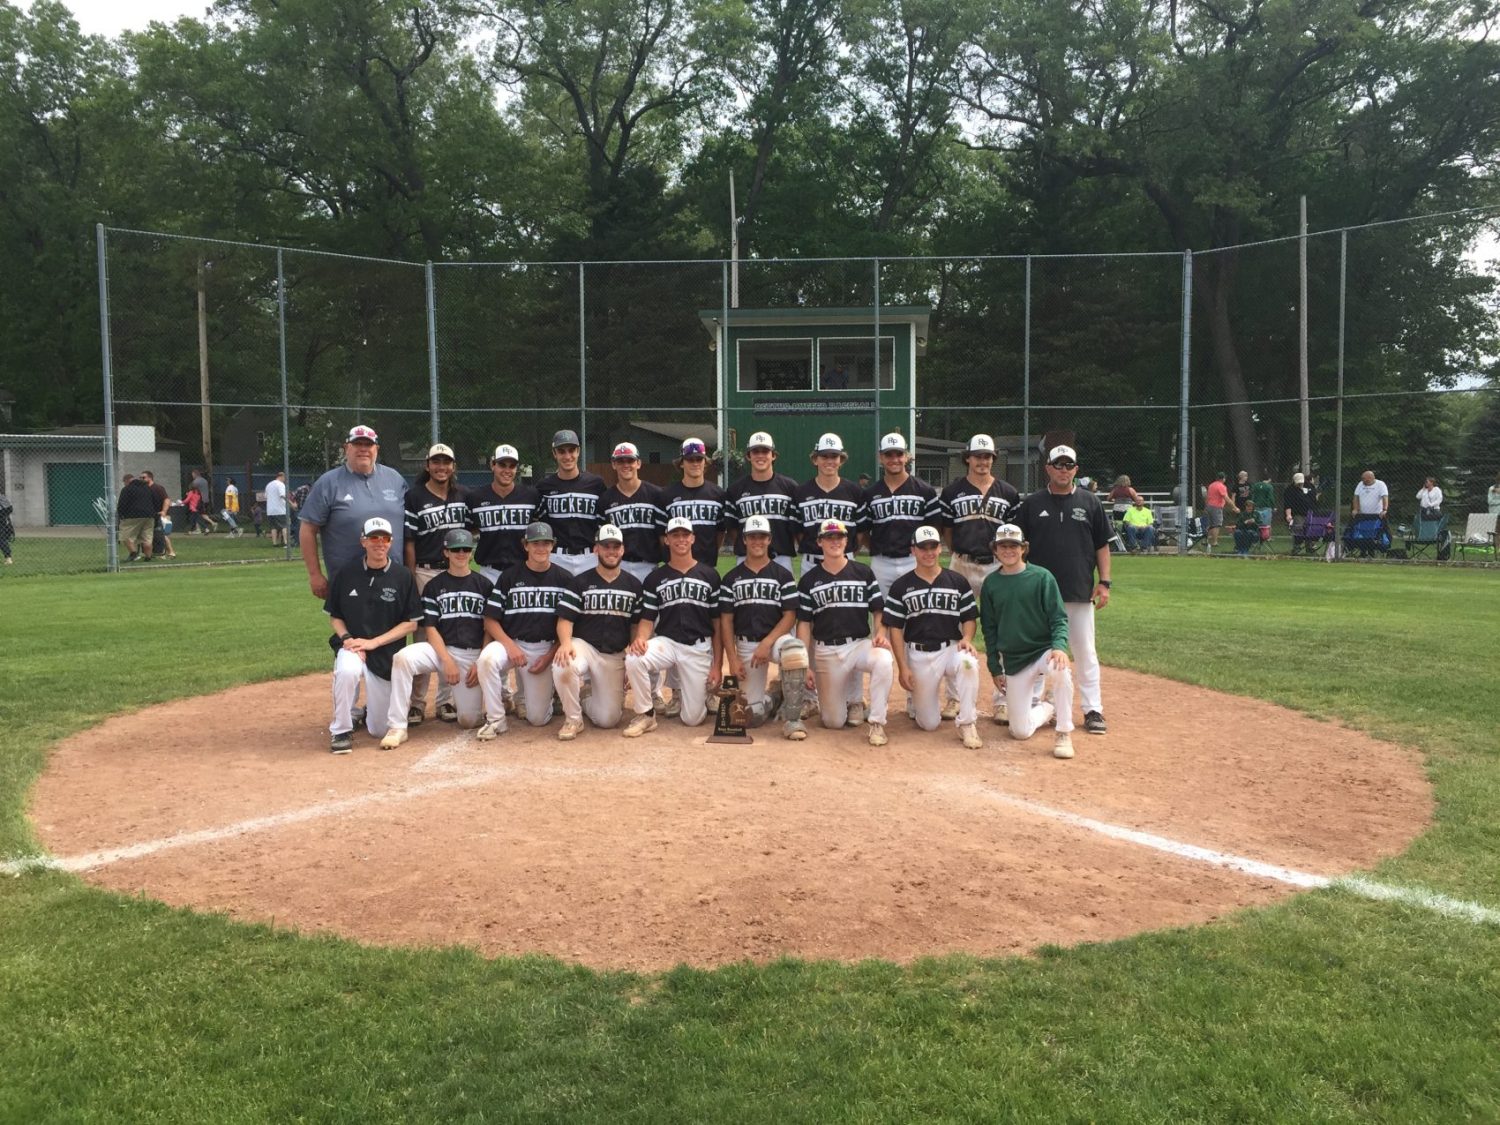 Reeths-Puffer knocks off 5th-ranked Kenowa Hills 7-6 to claim Division 1 baseball district championship